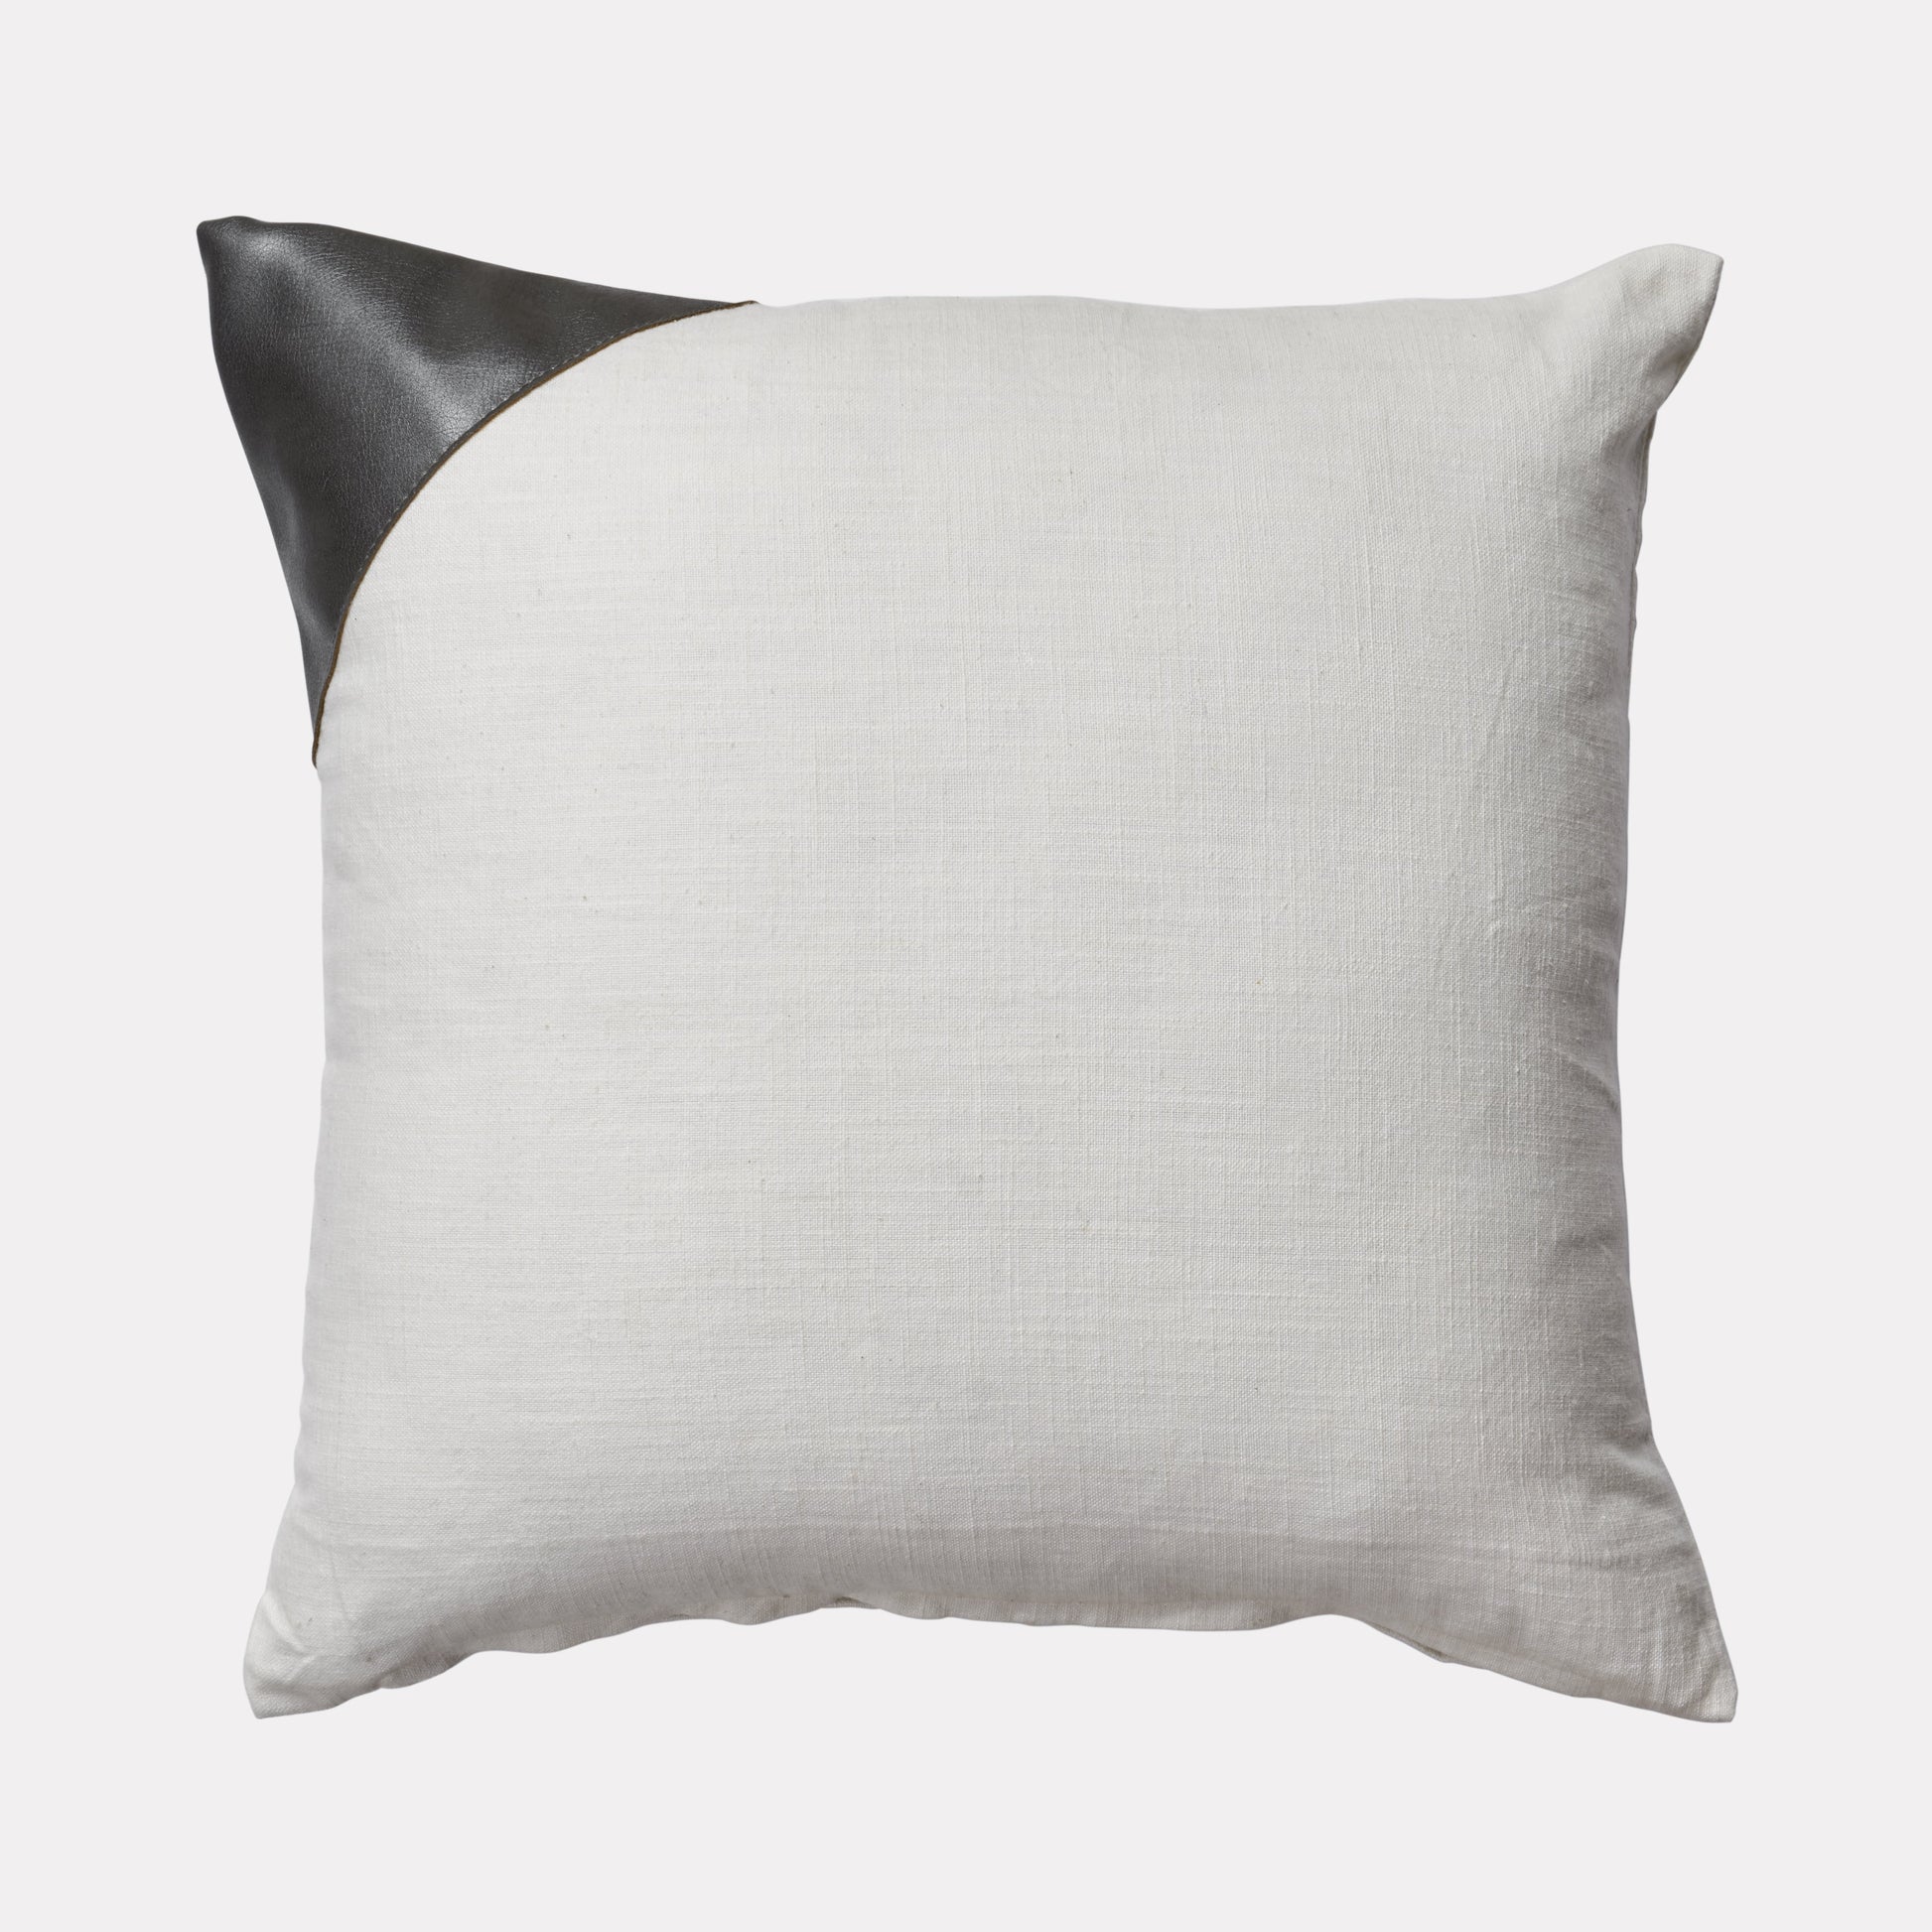 Leather Accent Pillow Cover | Product Image | Uncommon James Home